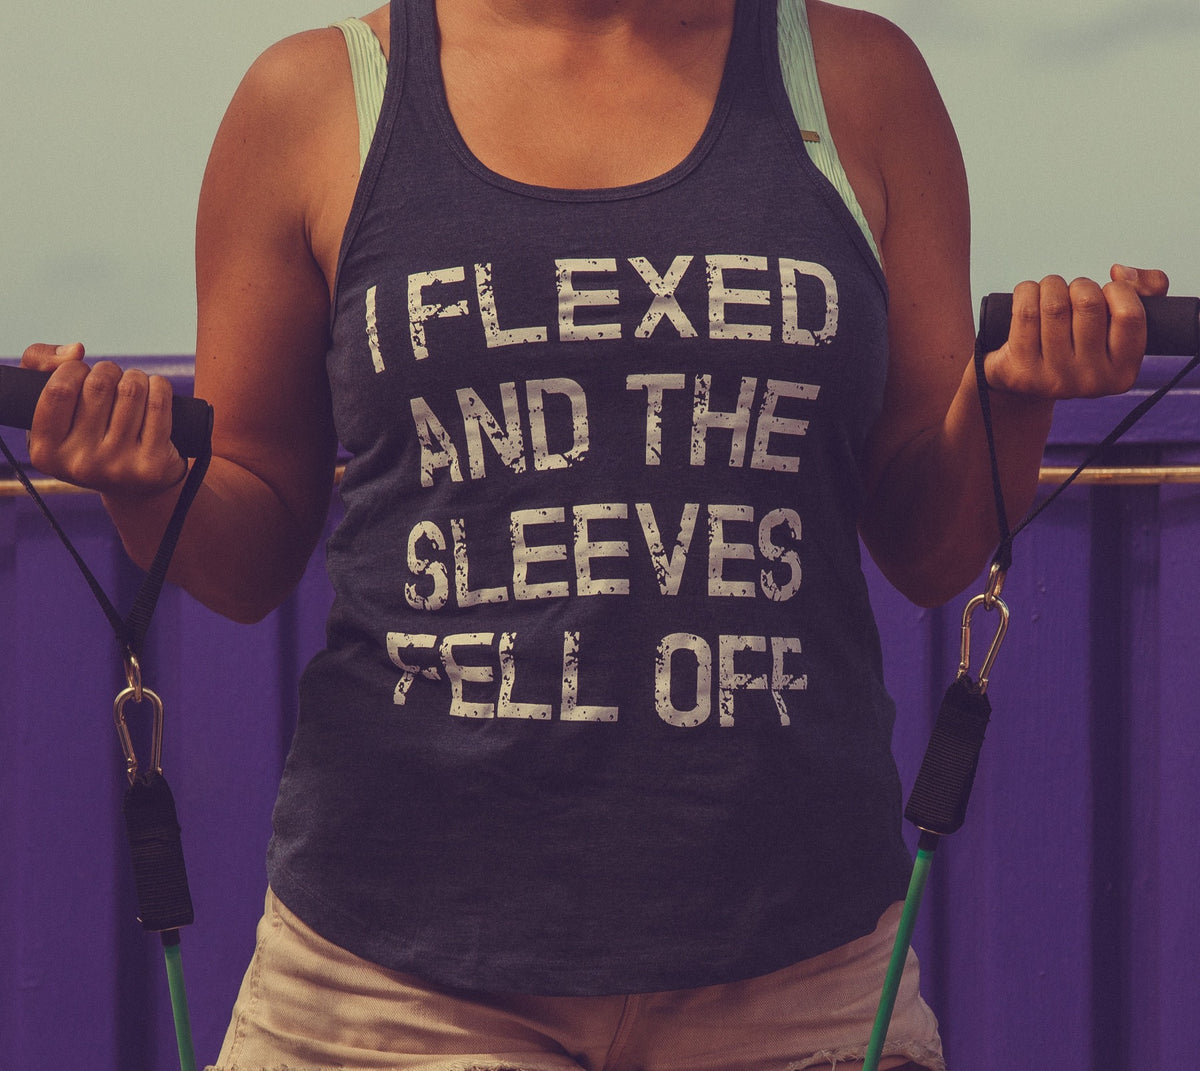 I Flexed And The Sleeves Fell Off Men&#39;s Tank Top